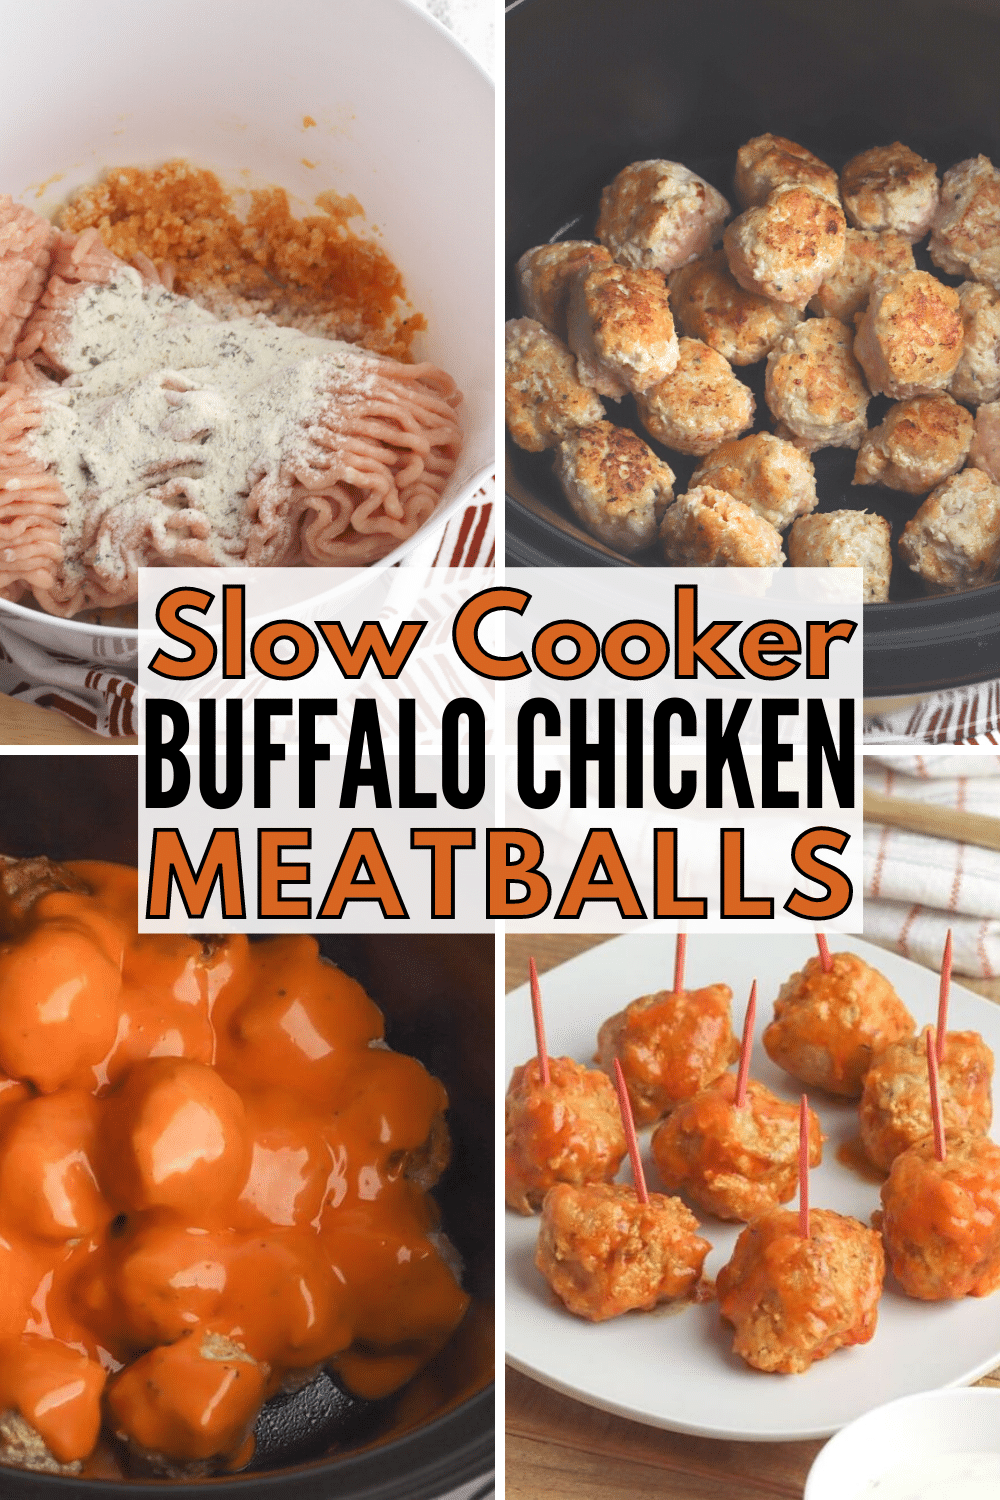 This slow cooker buffalo chicken meatball recipe is bold and delicious. The chicken meatballs make a great party appetizer or main dish recipe. #buffalosauce #meatballs #slowcooker via @wondermomwannab